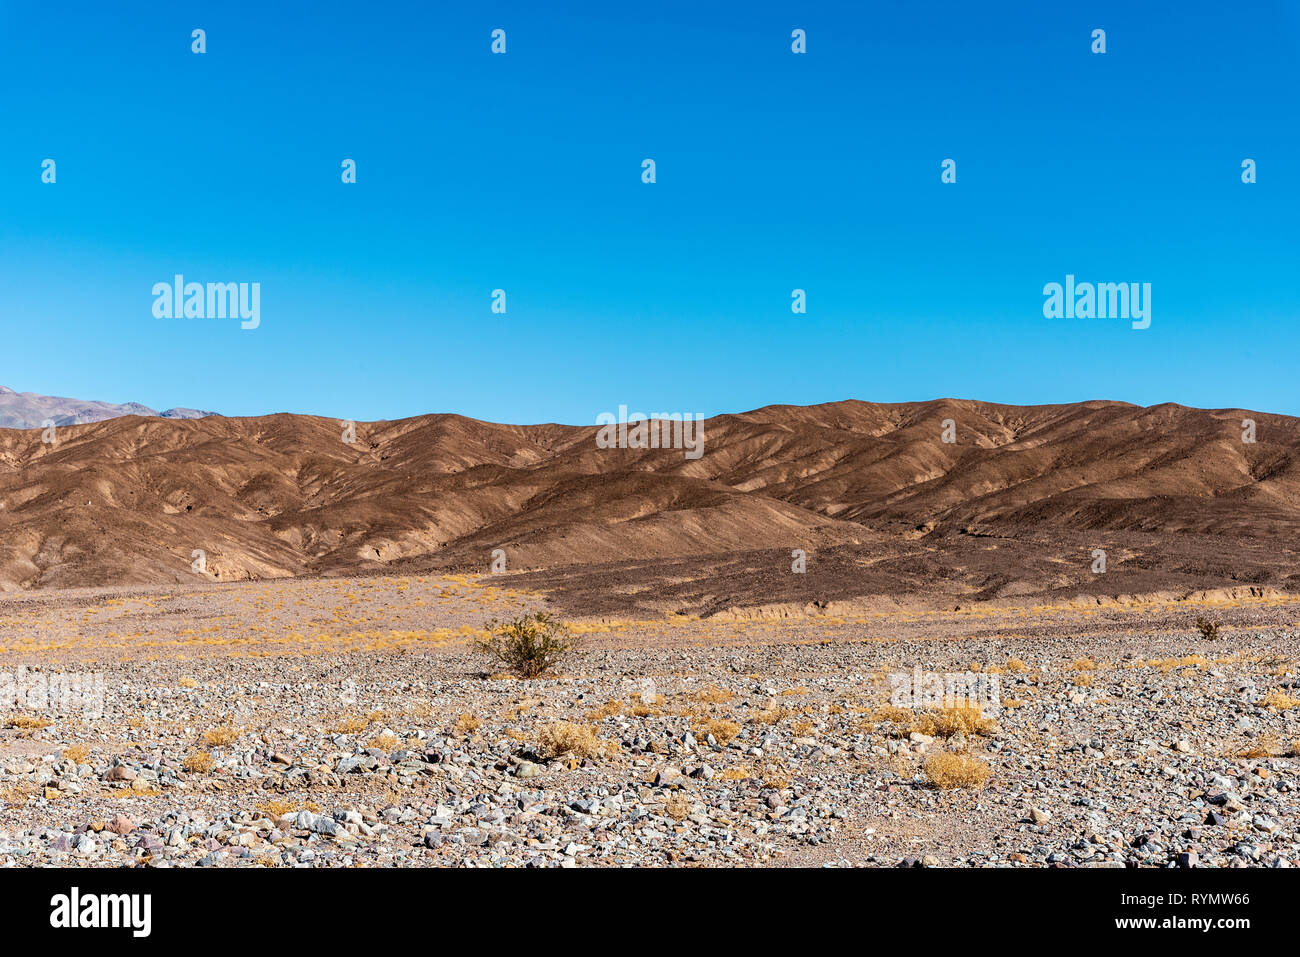 Sparce vegetation on rocky desert valley floor giving way to dry brown barren mountains under a blue sky. Stock Photo